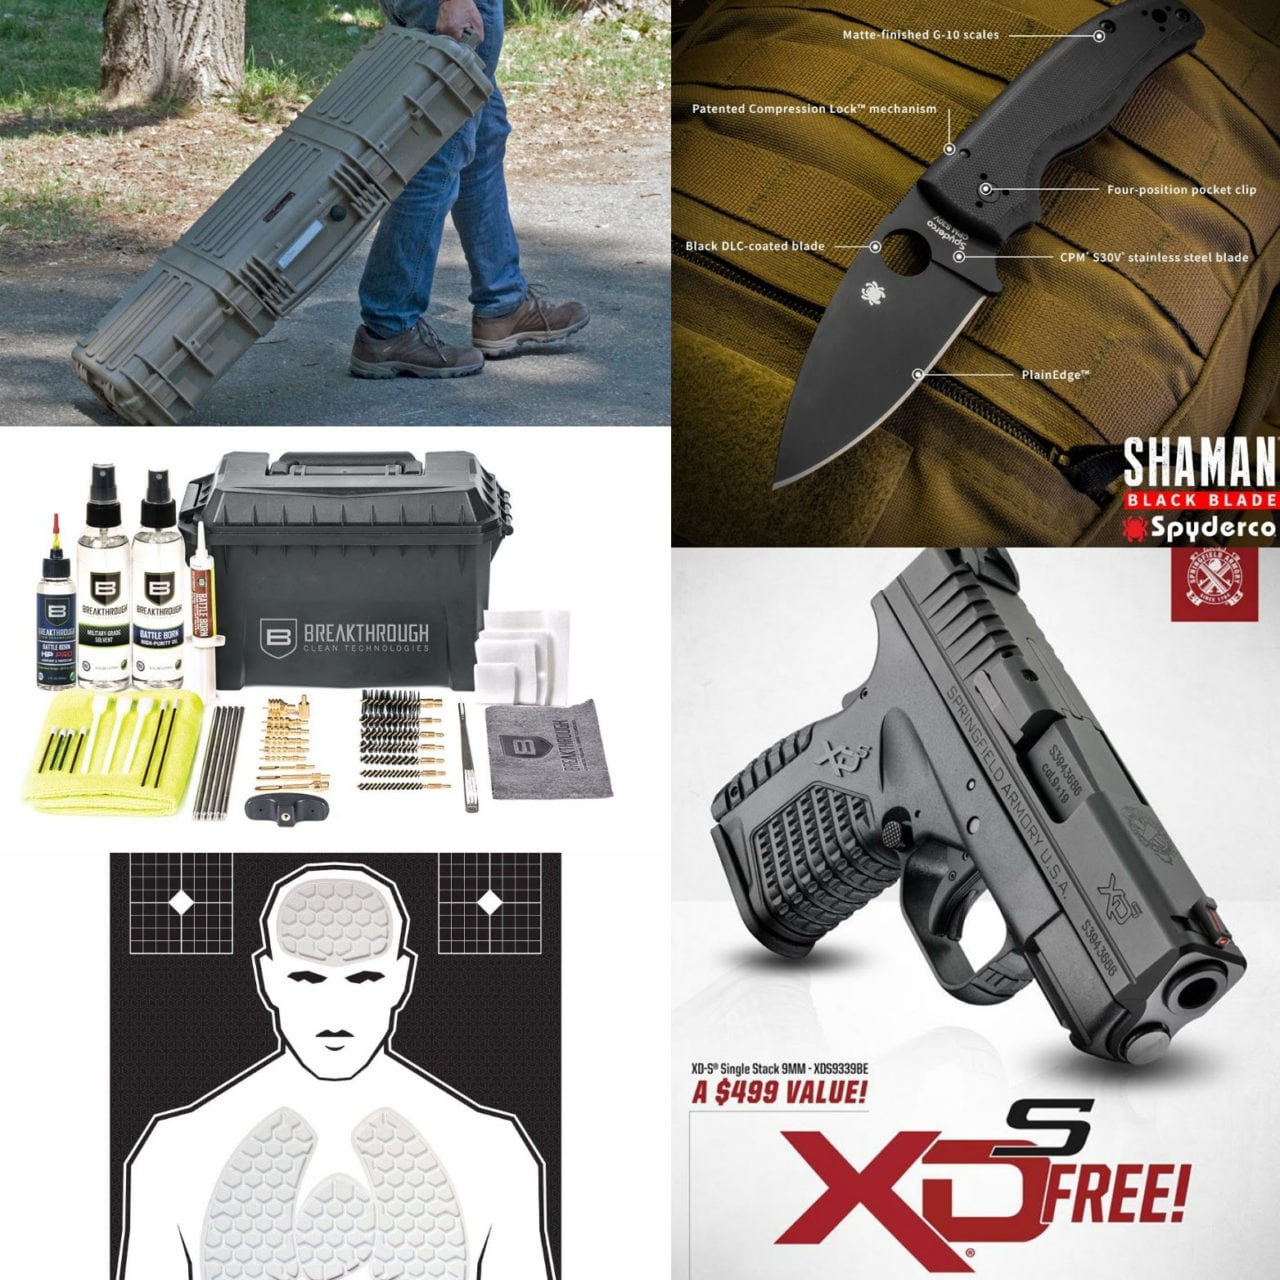 Weekly News: Last Chance to Enter $1000+ Gear Giveaway, New Single Pistol Case & More